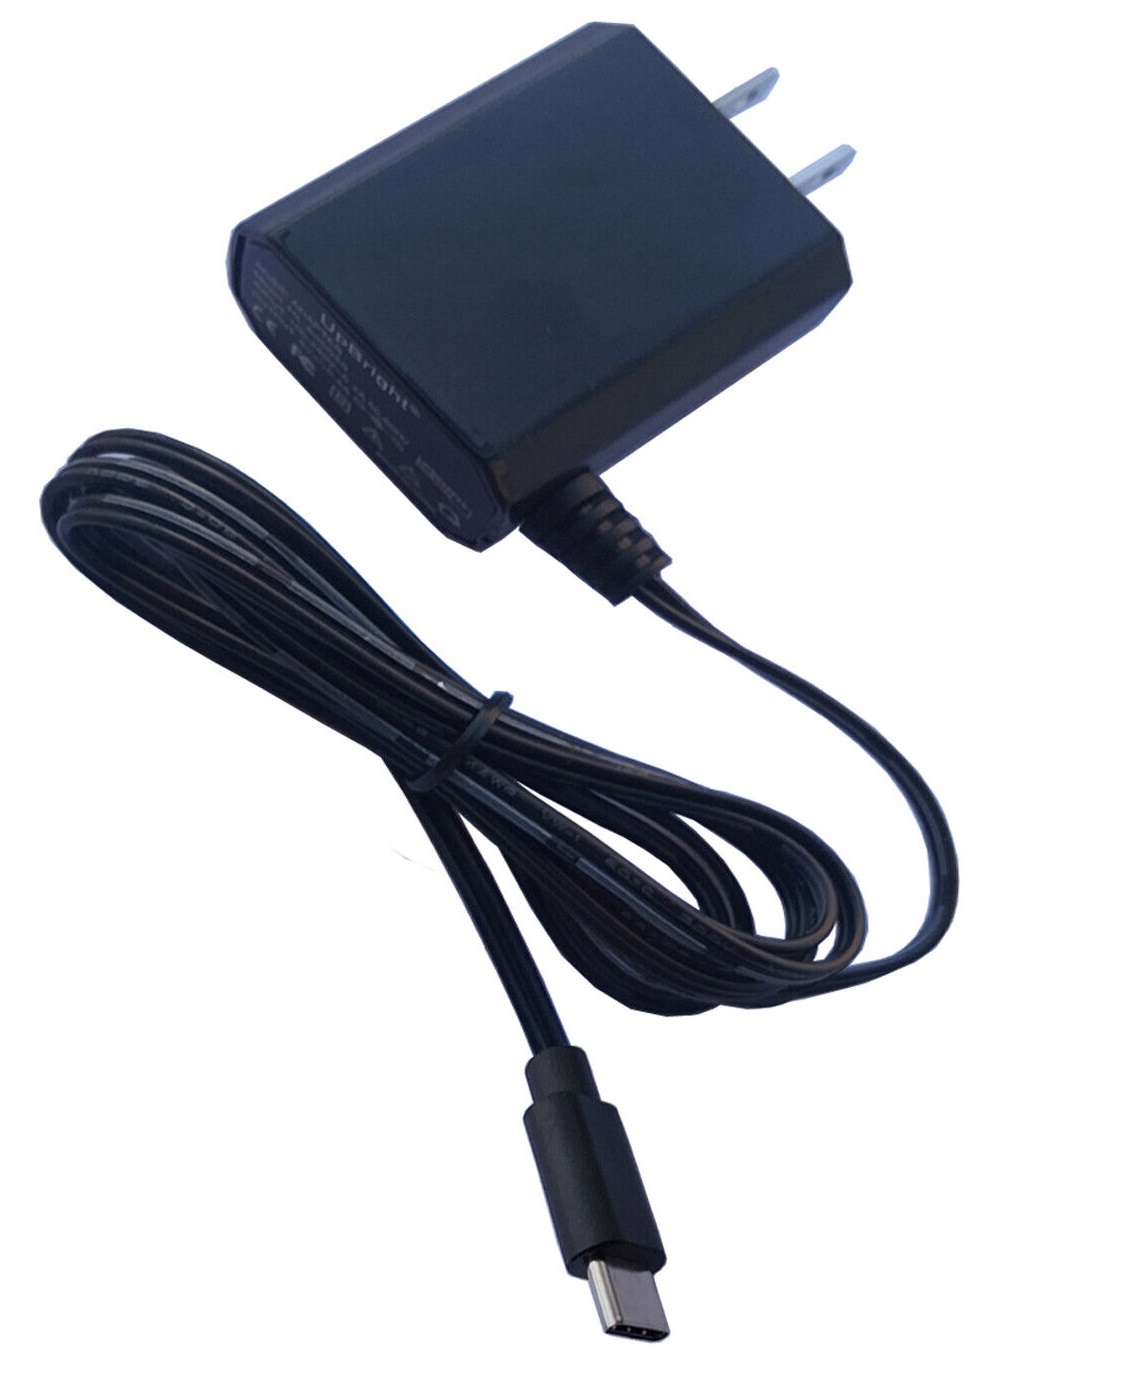 *Brand NEW* DC 7.4V 2000mAh AC Adapter USB DC Cable For RENPHO Reach C007 R-C007 RC007 Muscle Massage Gun